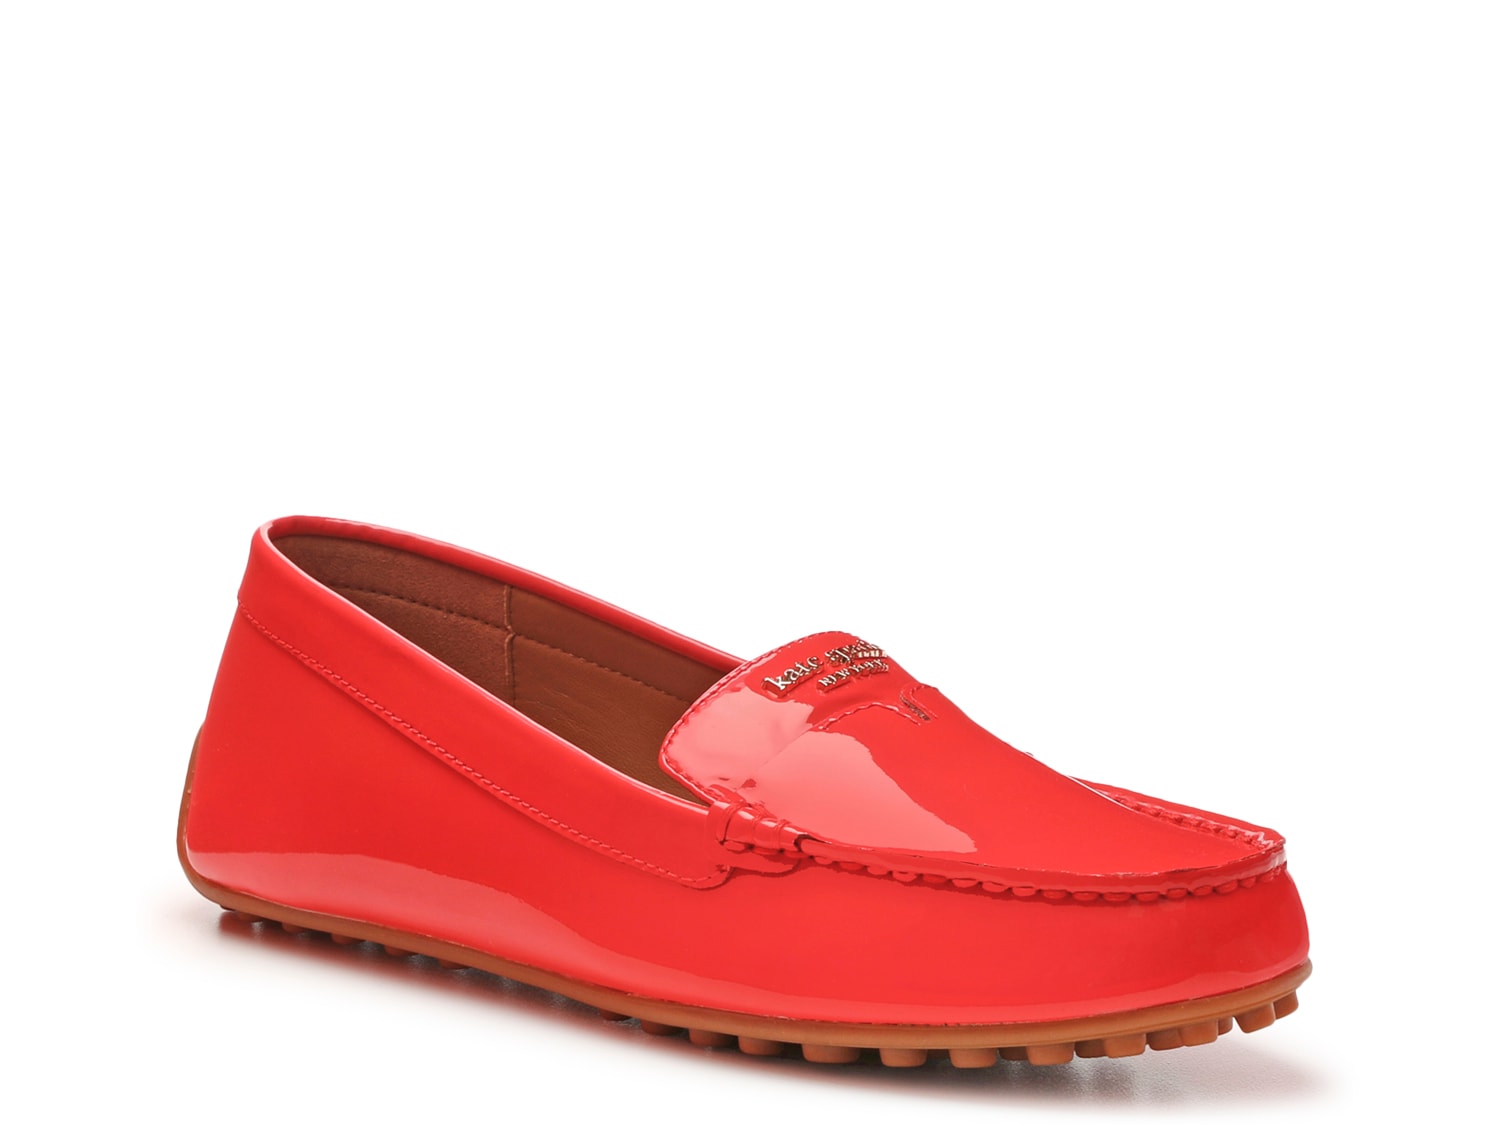 Kate Spade Women Slip On Moc Toe Driving Loafers Deck Patent Leather ...